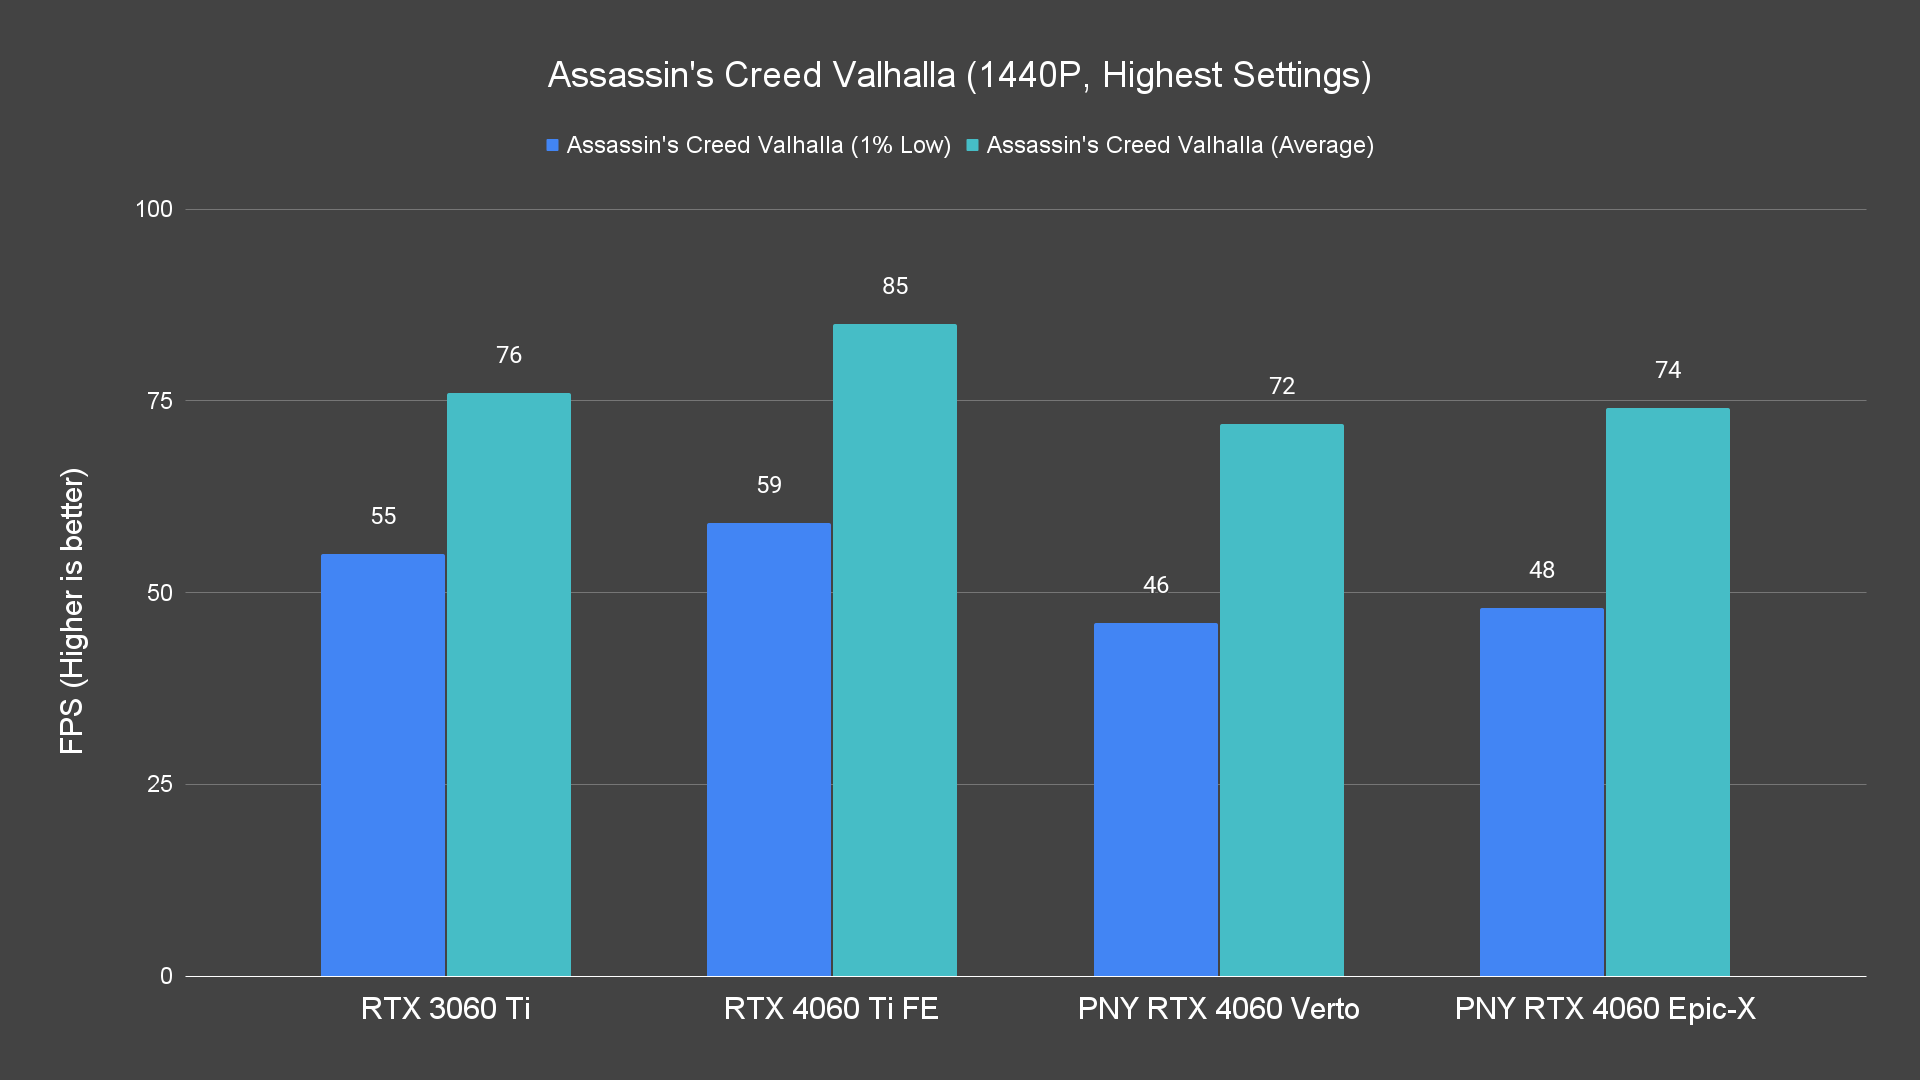 Assassin's Creed Valhalla (1440P, Highest Settings)